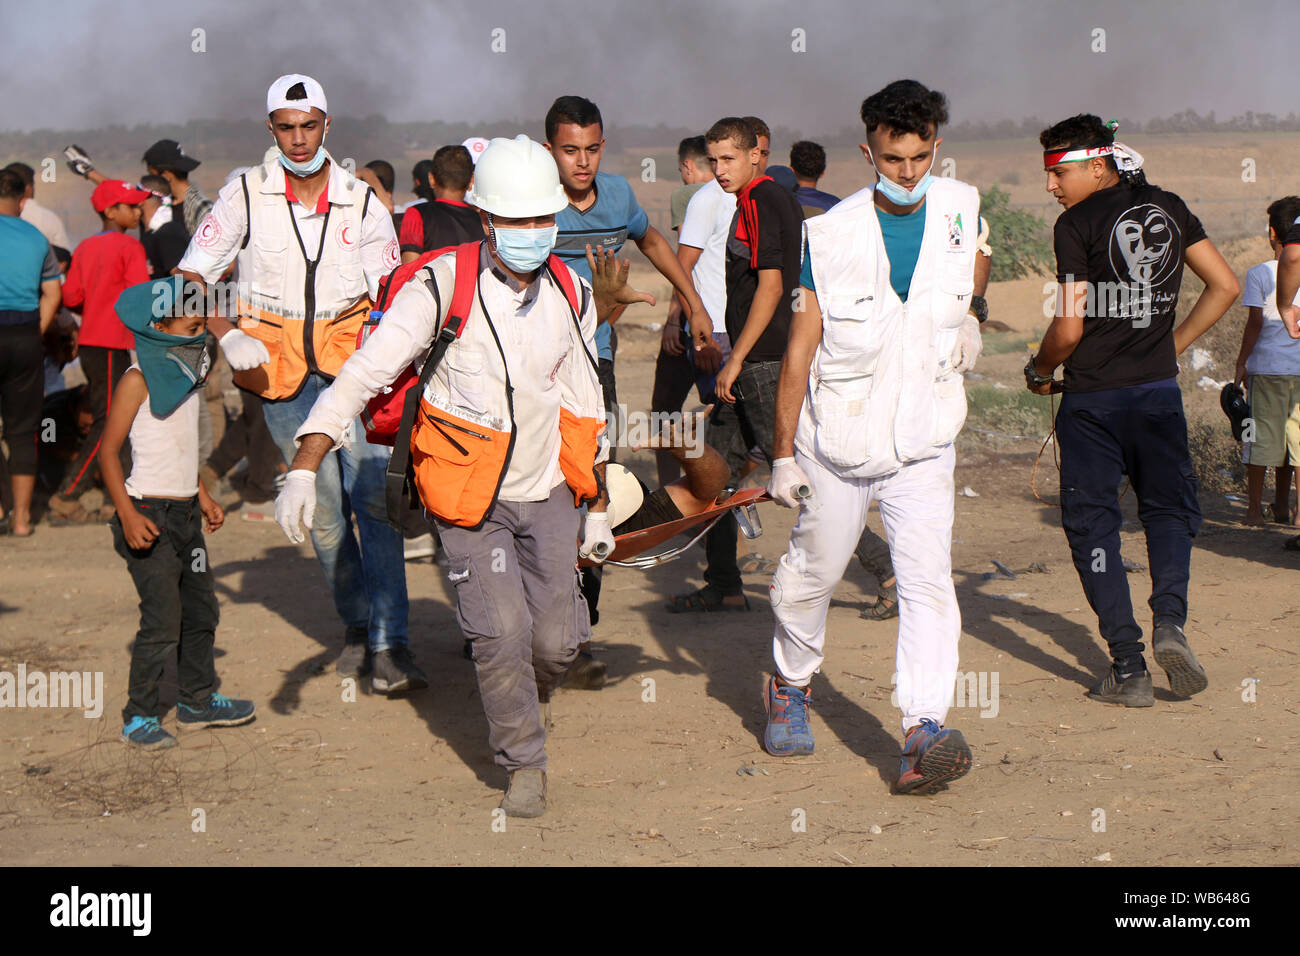 Khan Younis, Gaza Strip, Palestinian Territory. 23rd Aug, 2019. A wounded Palestinian protester is evacuated during clashes with Israeli troops following the tents protest where Palestinians demand the right to return to their homeland at the Israel-Gaza border. Credit: Mariam Dagga/APA Images/ZUMA Wire/Alamy Live News Stock Photo